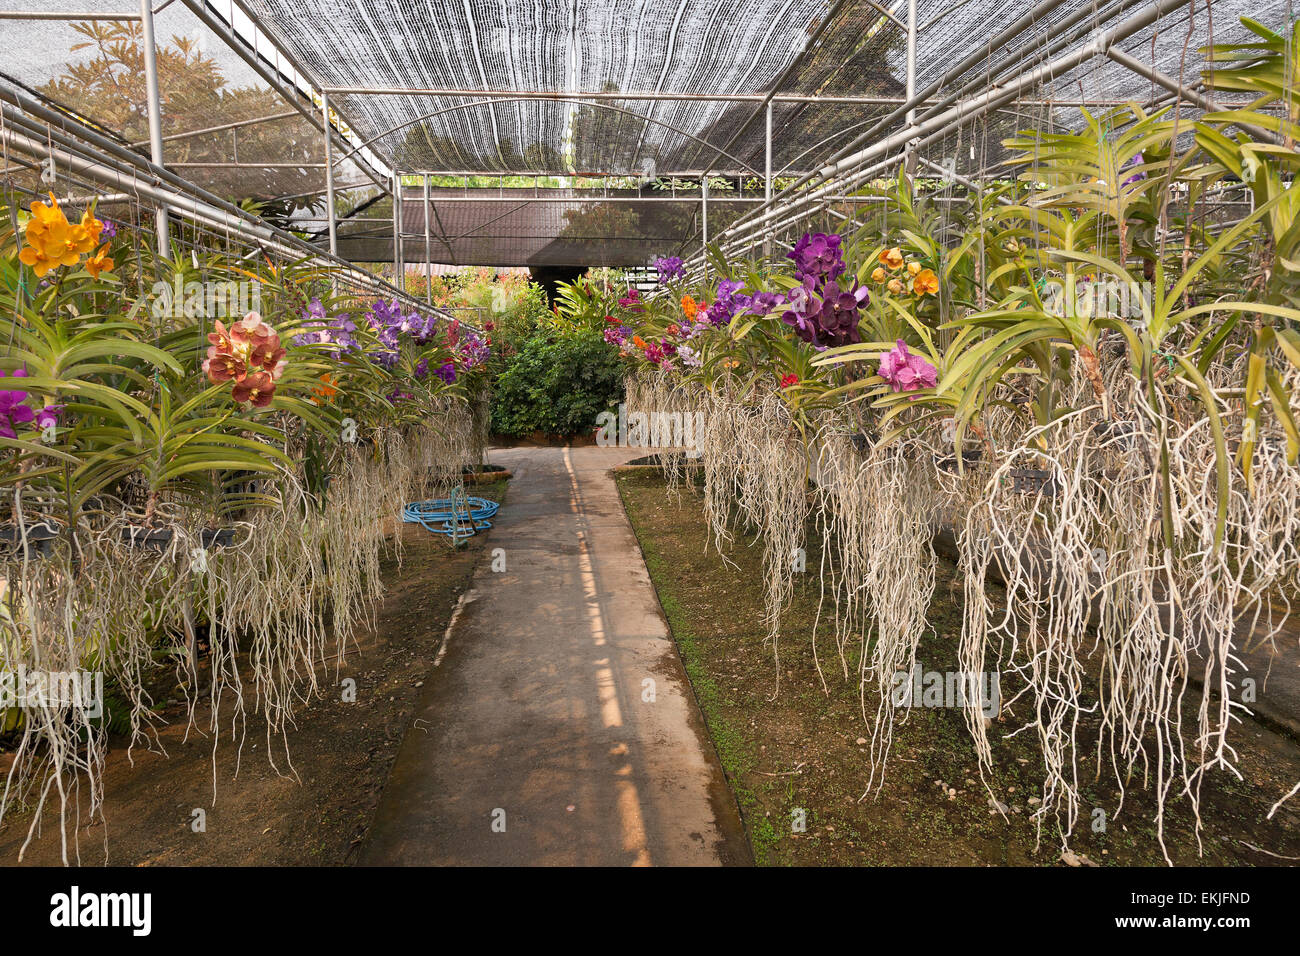 Orchid farm, Thailand, flowers growing in hanging pots in charcoal medium Stock Photo